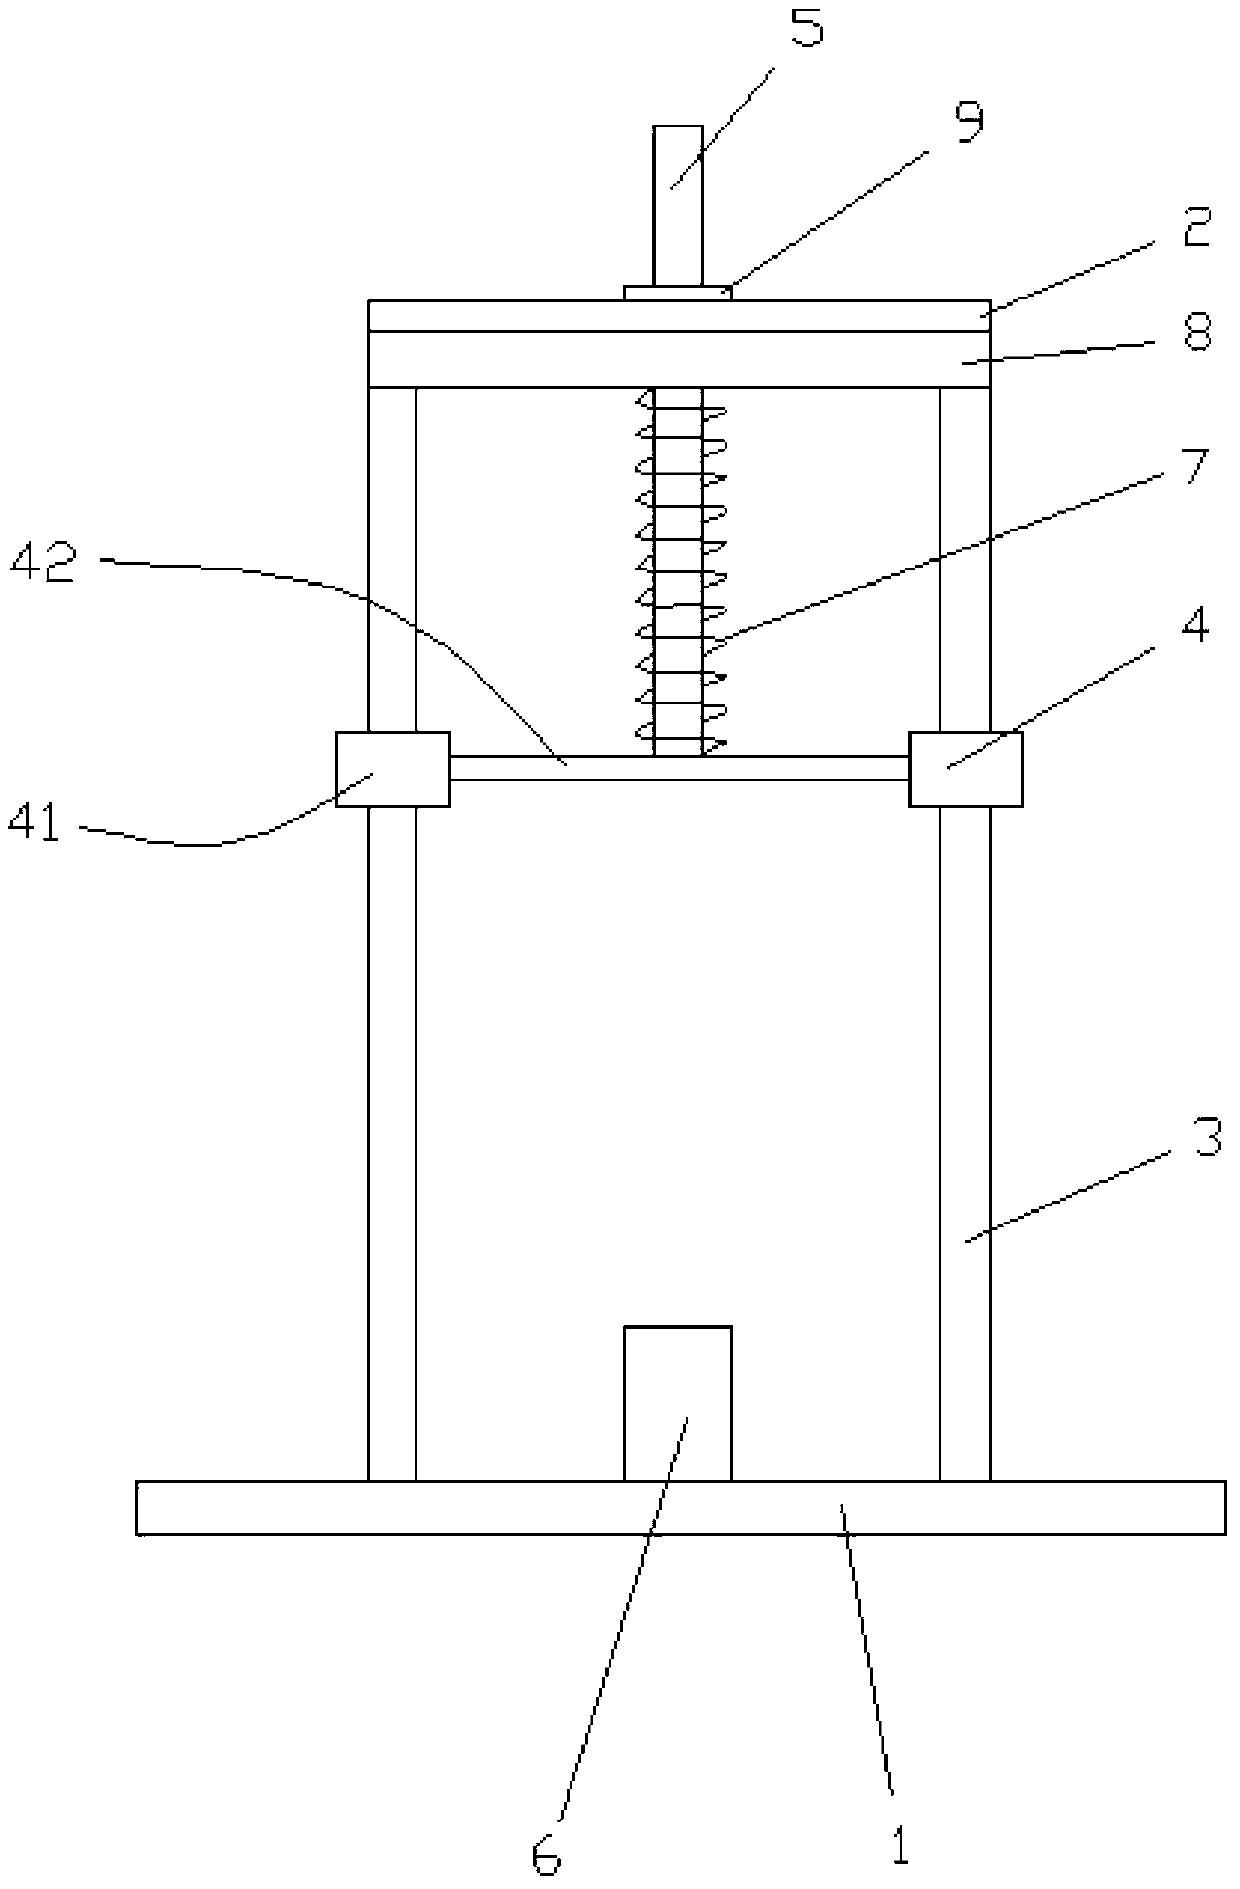 Automobile support leg detection support frame